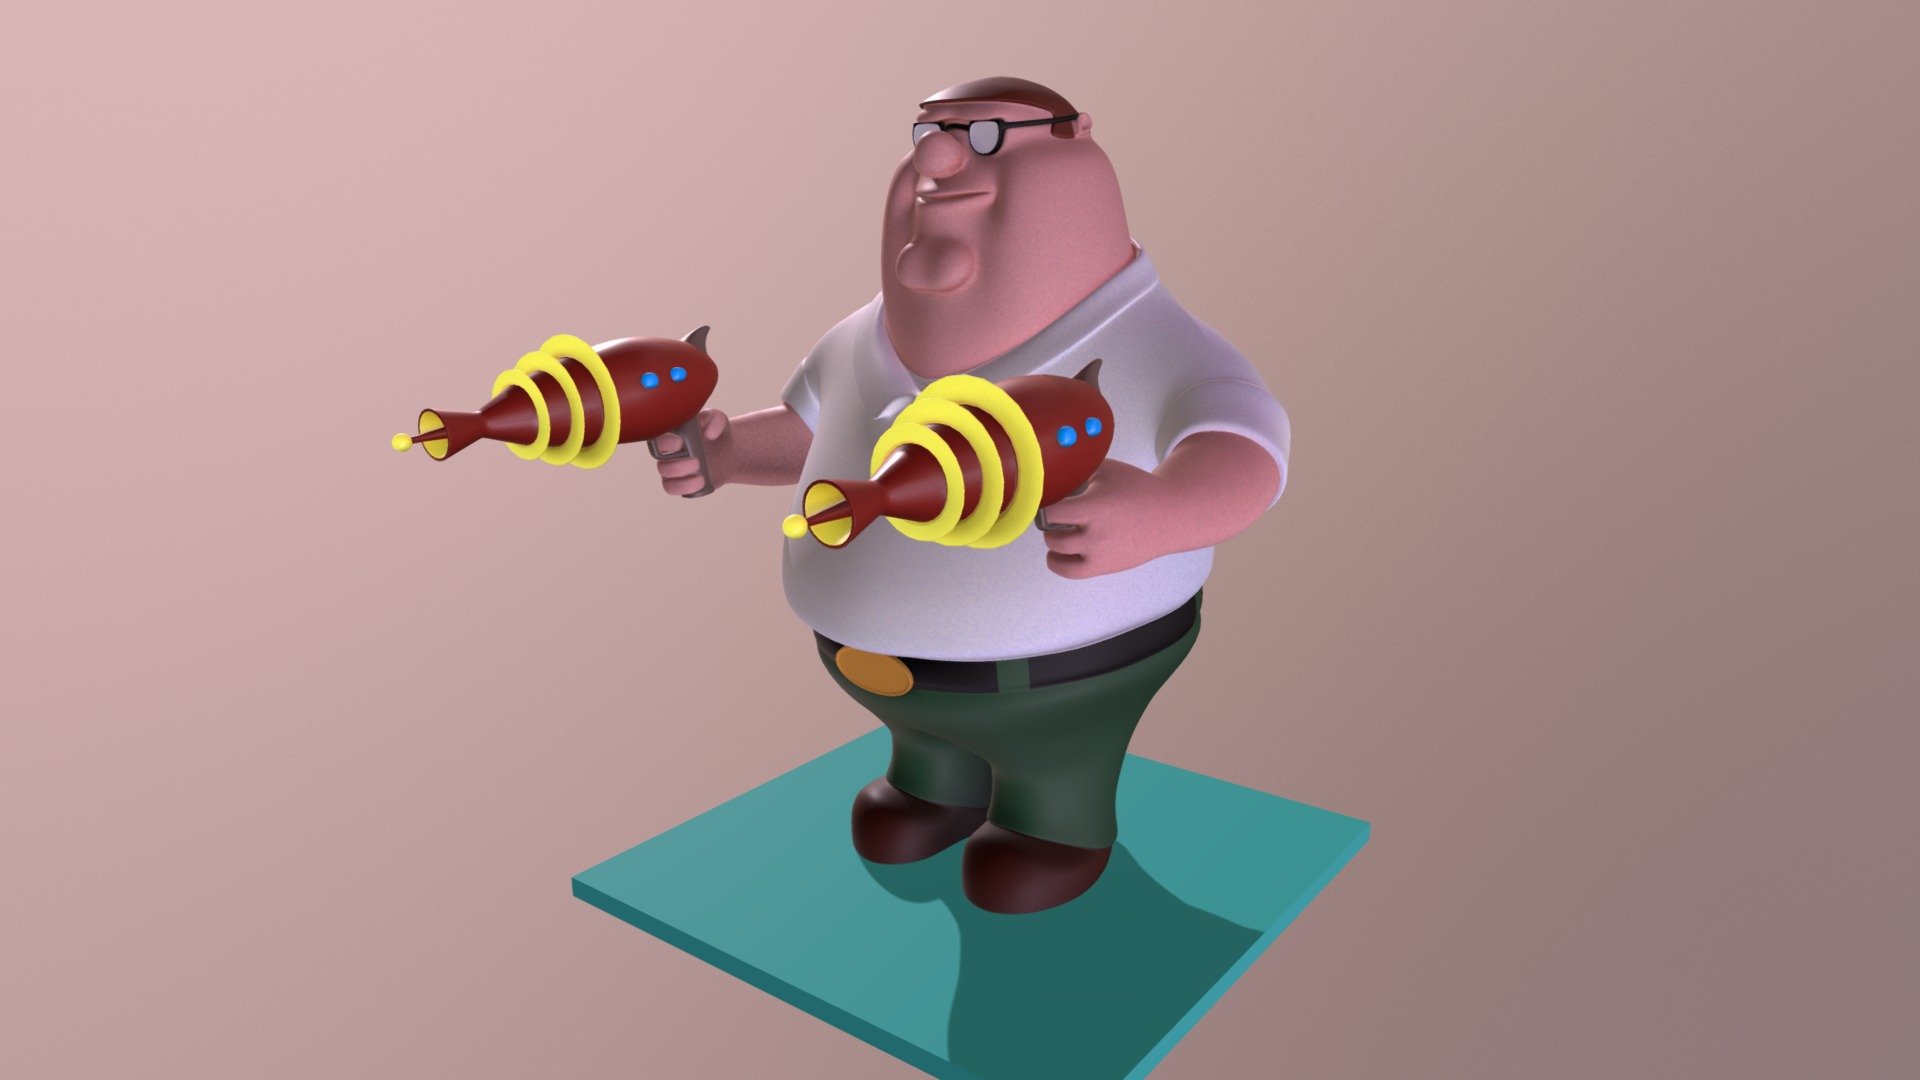 Character from animated cartoon &ldquo;Family Guy